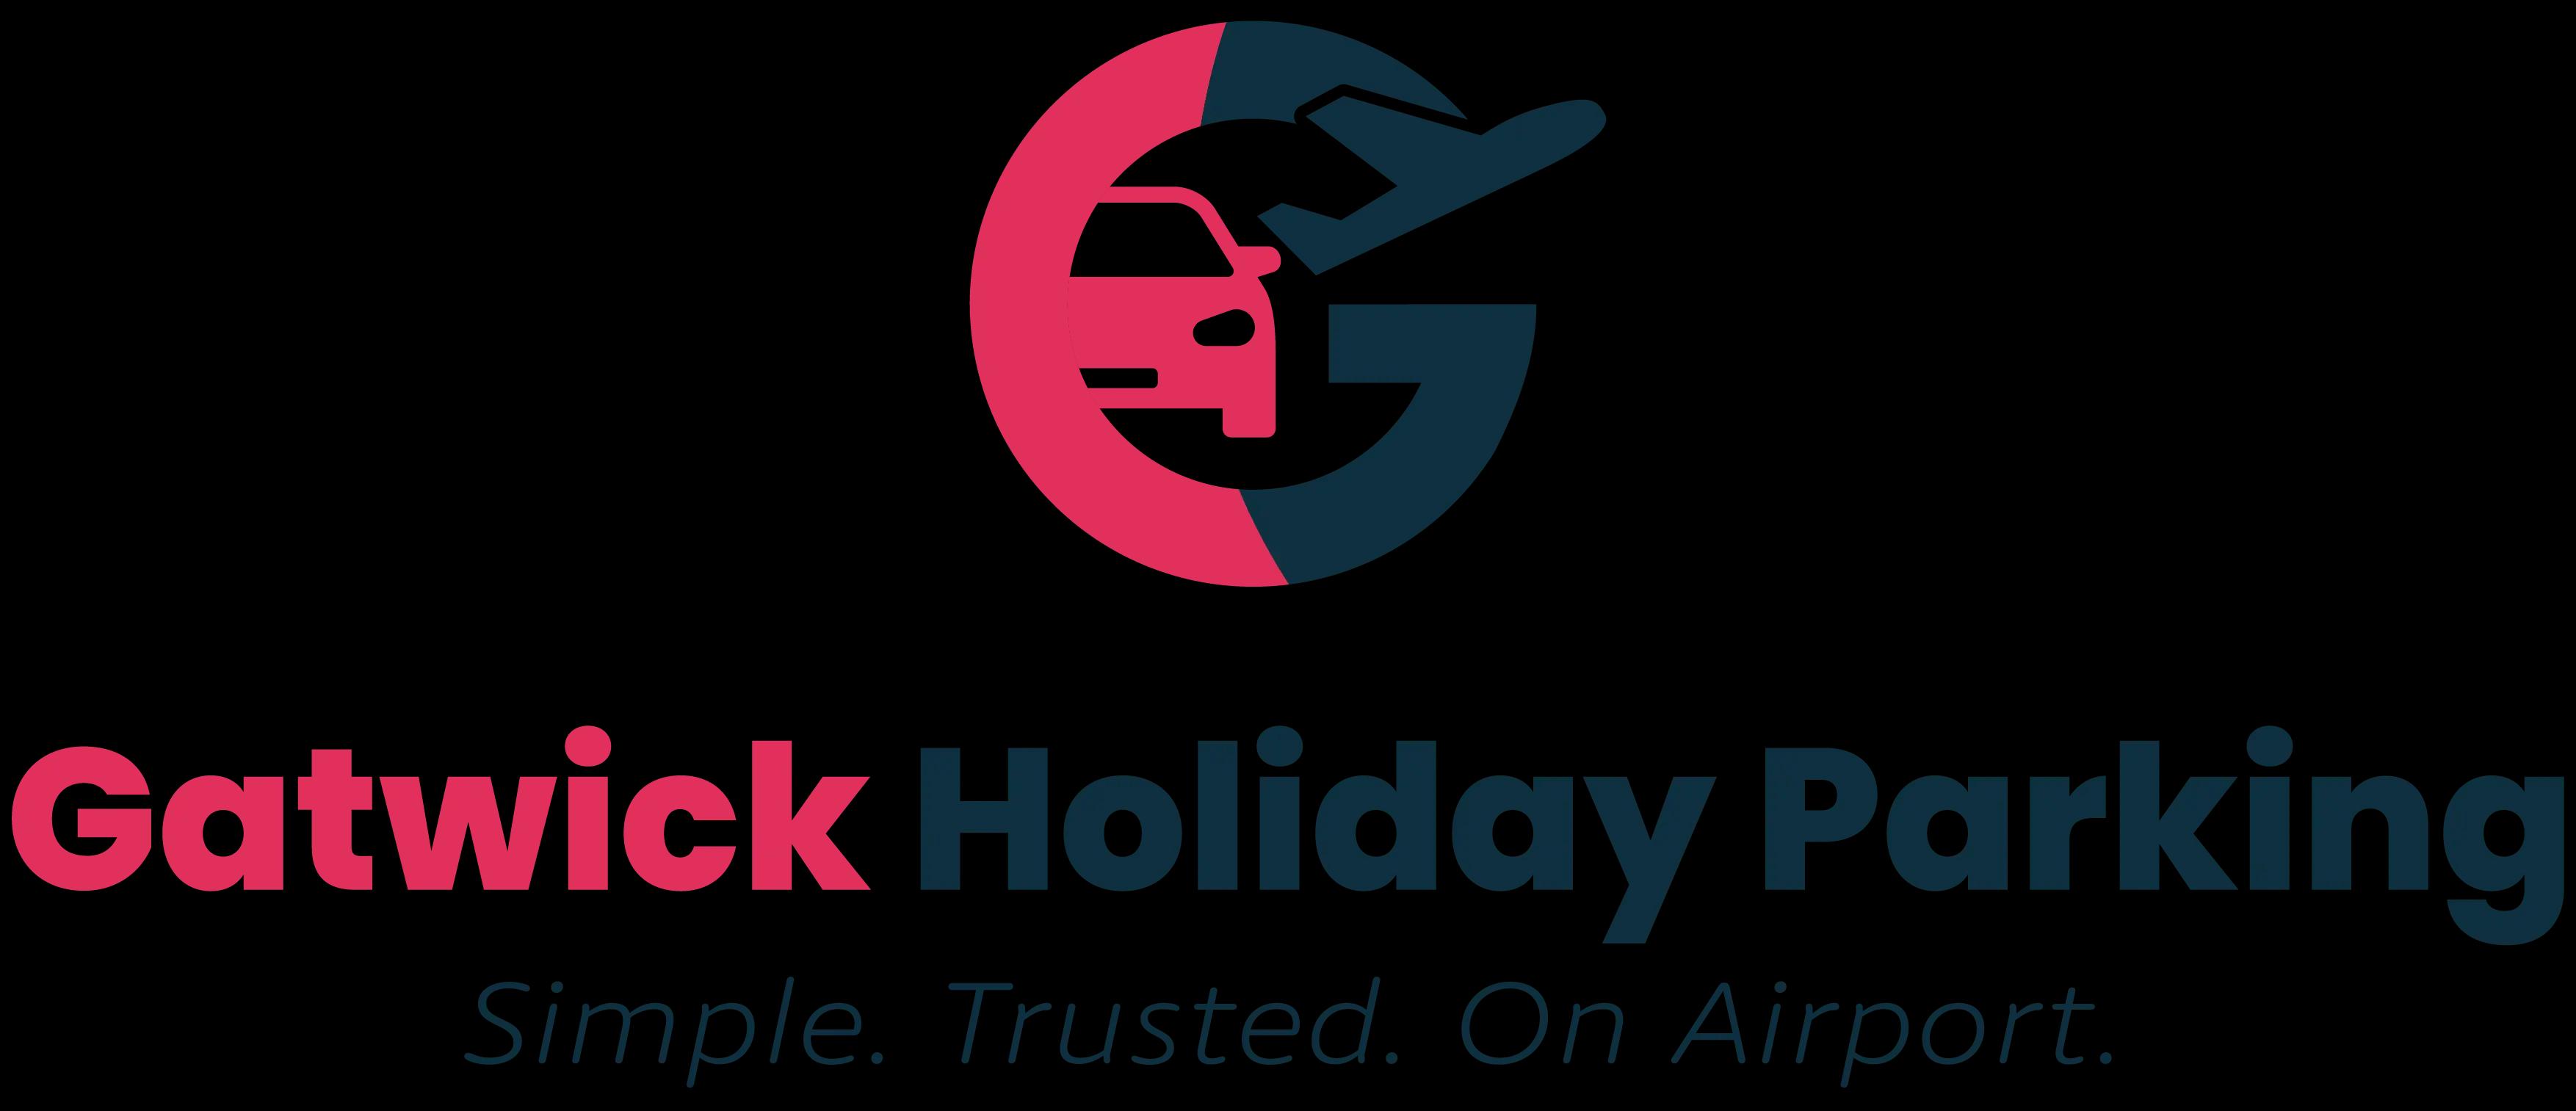 Gatwick Airport Parking coupon codes